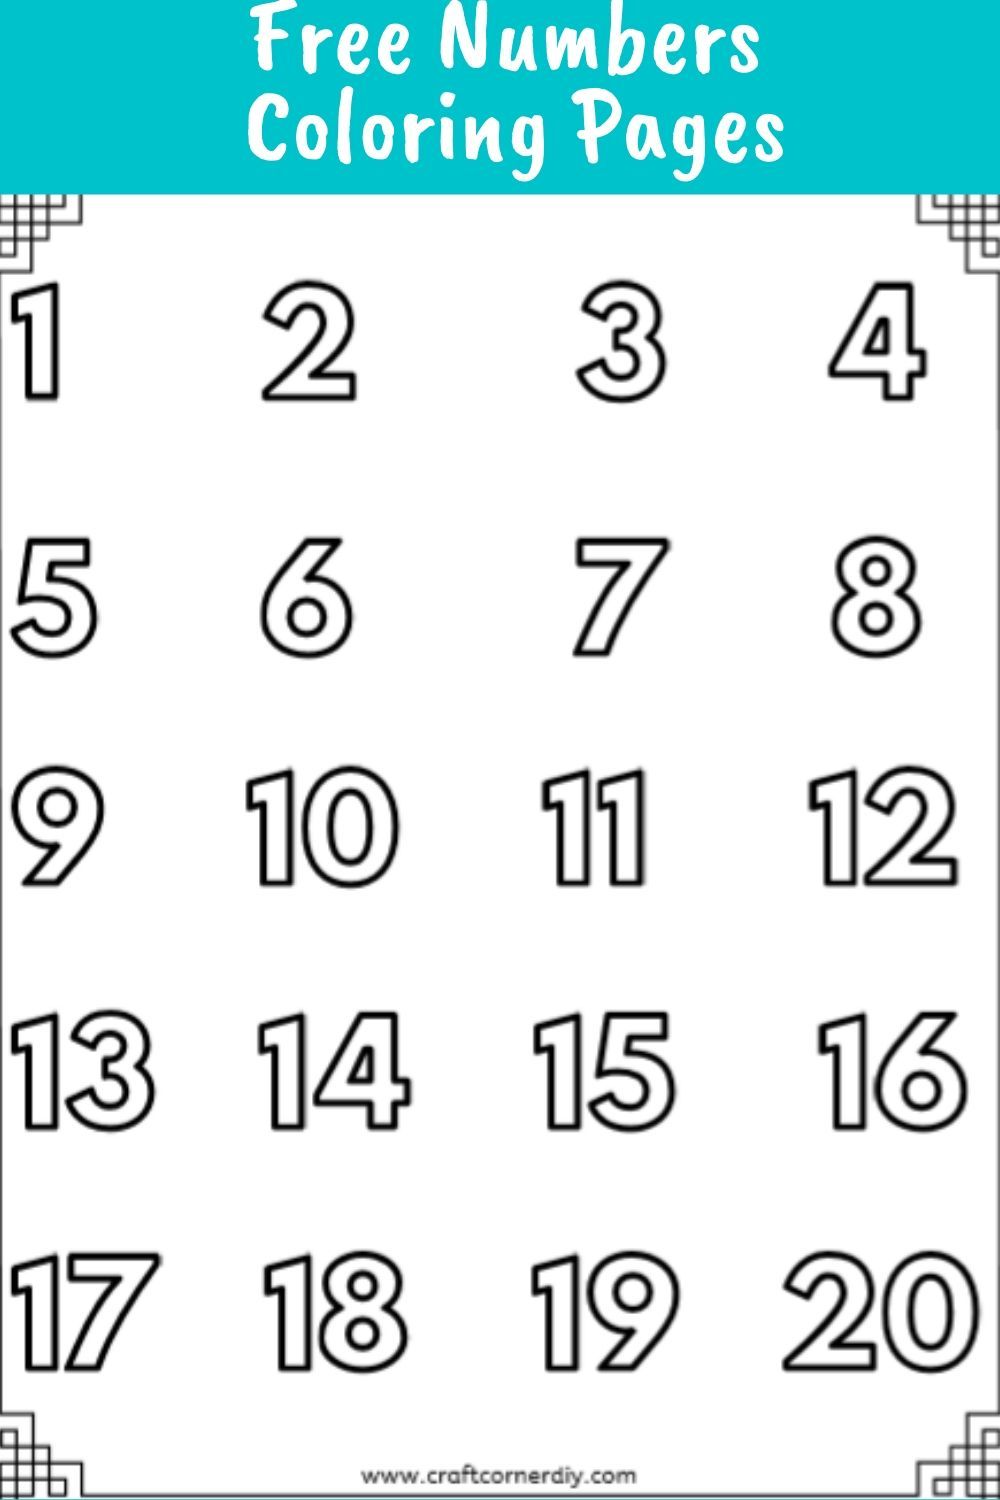 Free numbers coloring pages coloring pages alphabet coloring pages free printable numbers